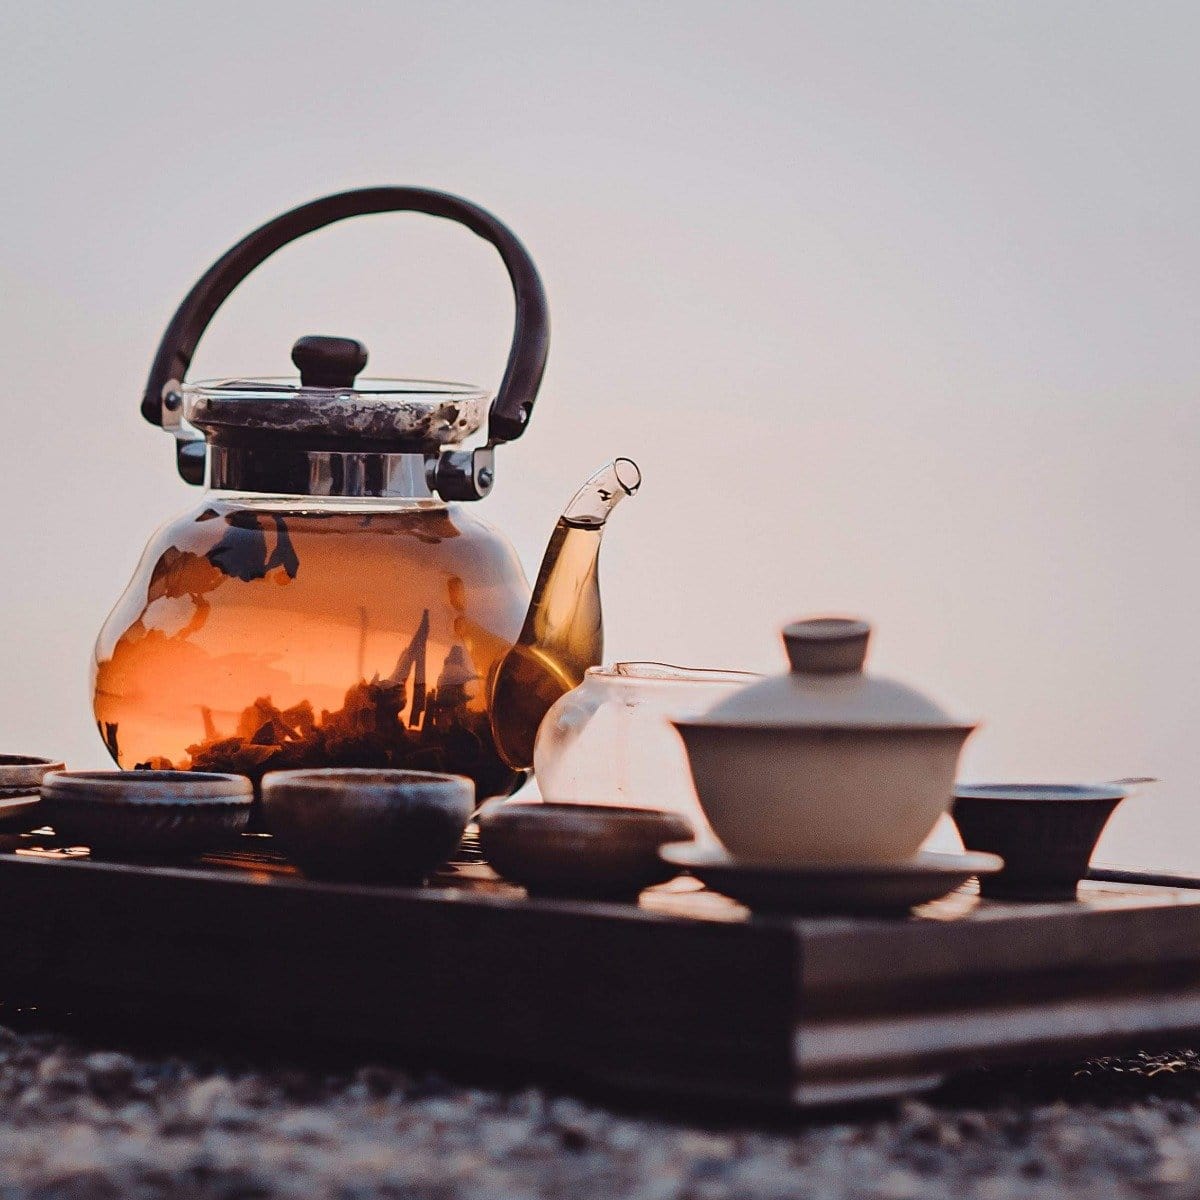 A glass teapot filled with Sin Eraser™ : Puerh Tea from Magic Hour sits on a wooden tray alongside several small cups and bowls. The tea has a warm amber hue, and the setup is outdoors, suggesting a serene, peaceful atmosphere.